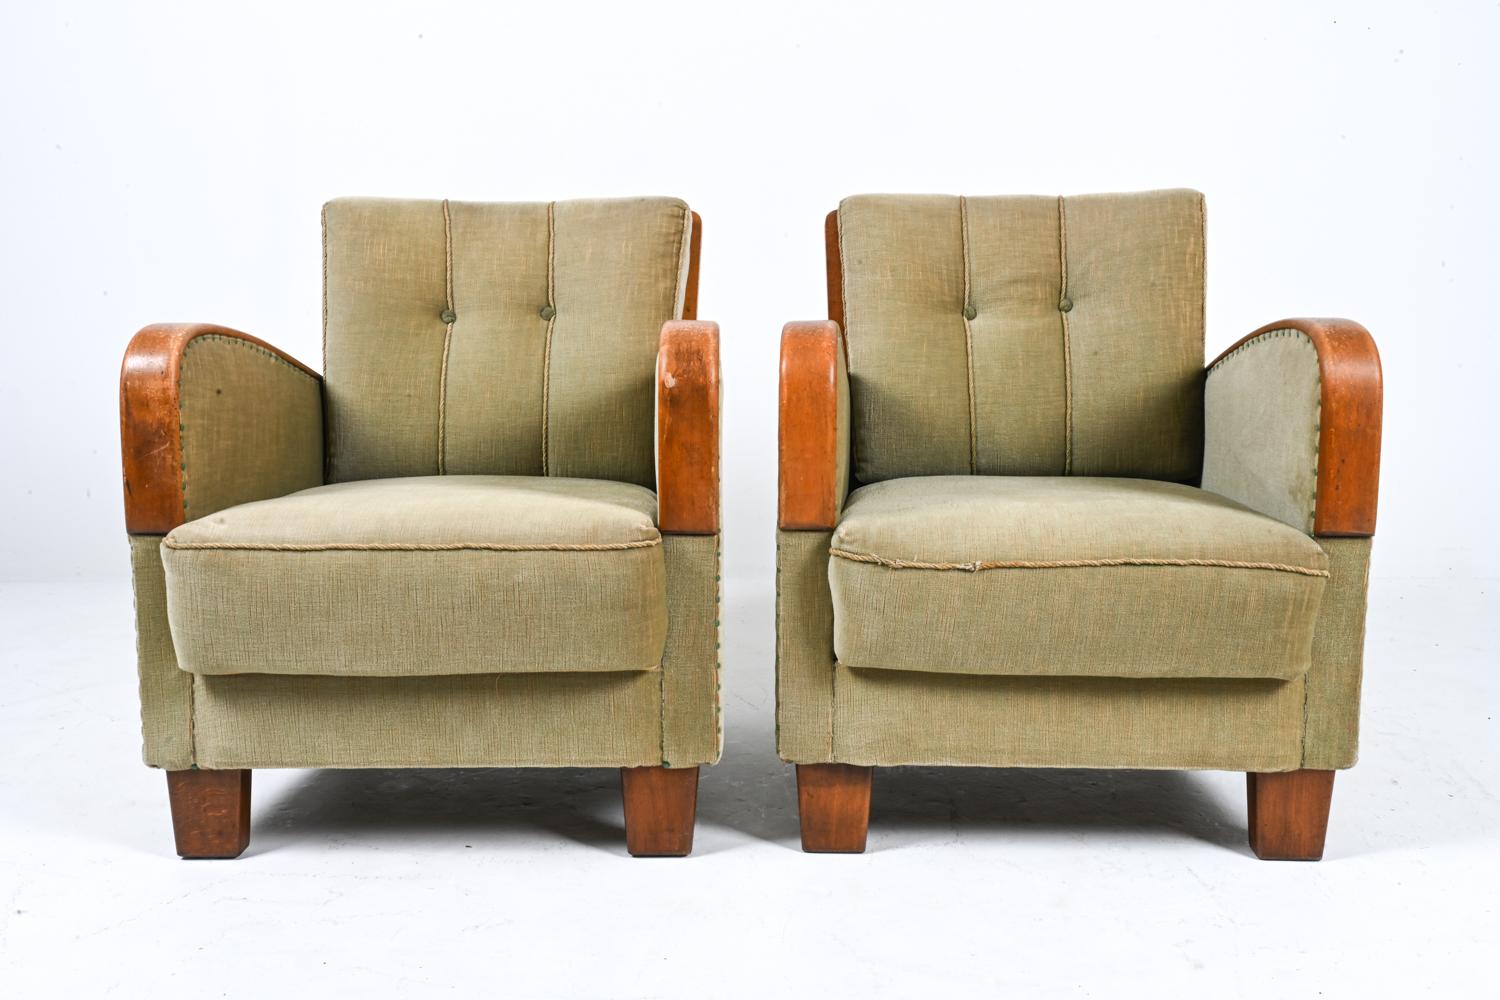 Pair of German Art Deco Oak Easy Chairs, c. 1940's In Fair Condition For Sale In Norwalk, CT